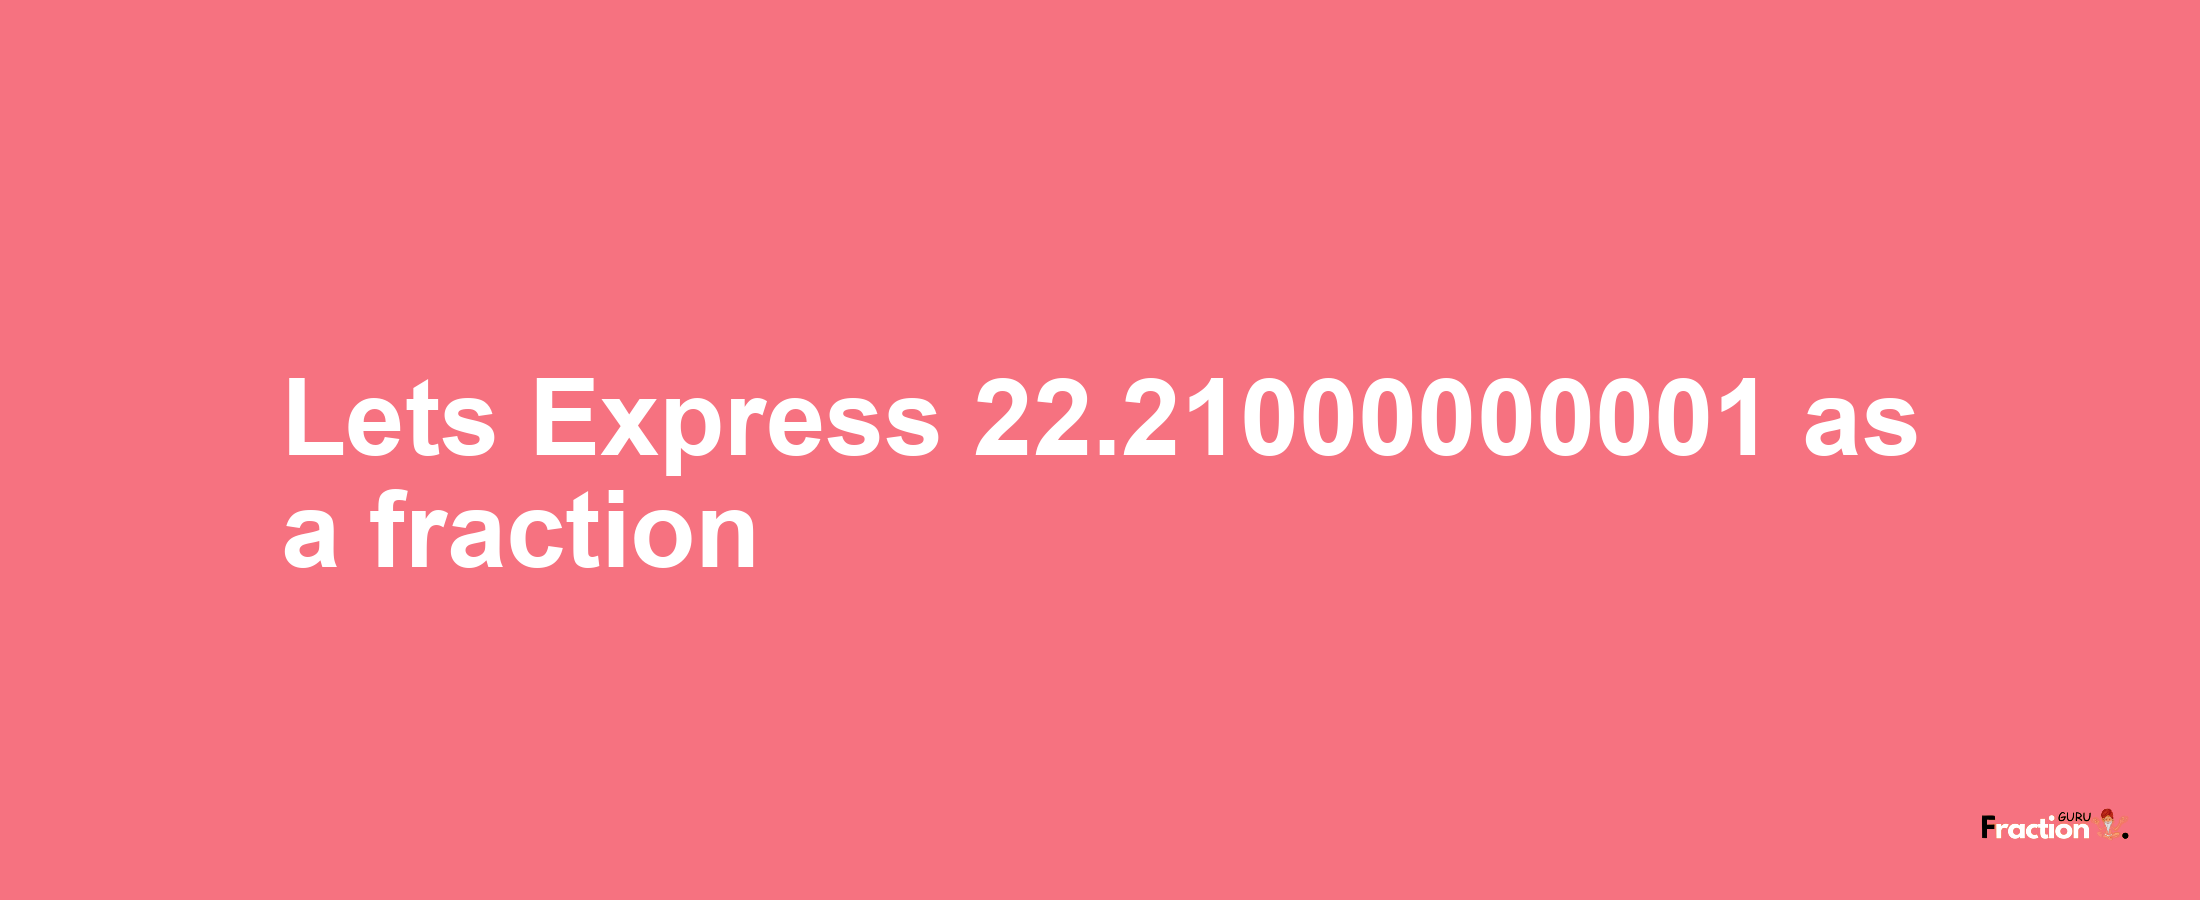 Lets Express 22.21000000001 as afraction